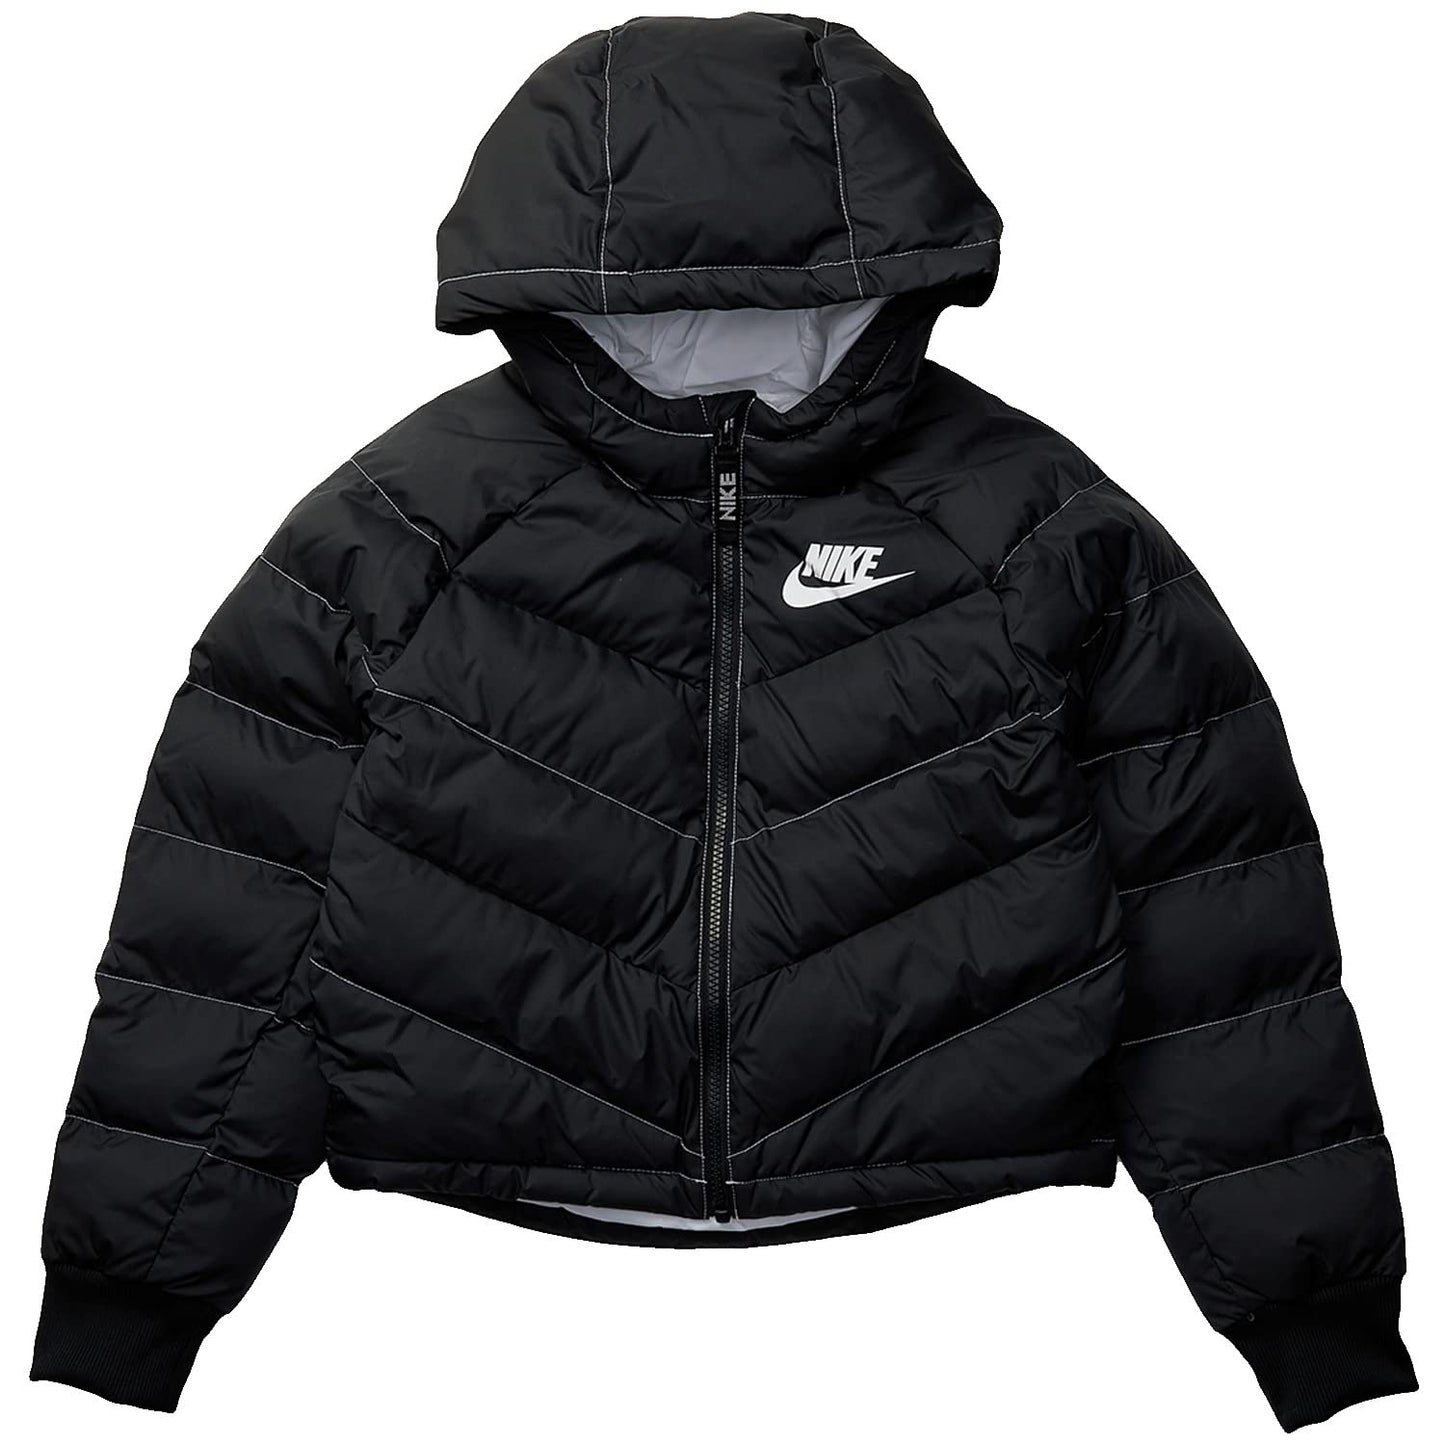 Image 1 of Synthetic Fill Hooded Jacket (Little Kids/Big Kids)